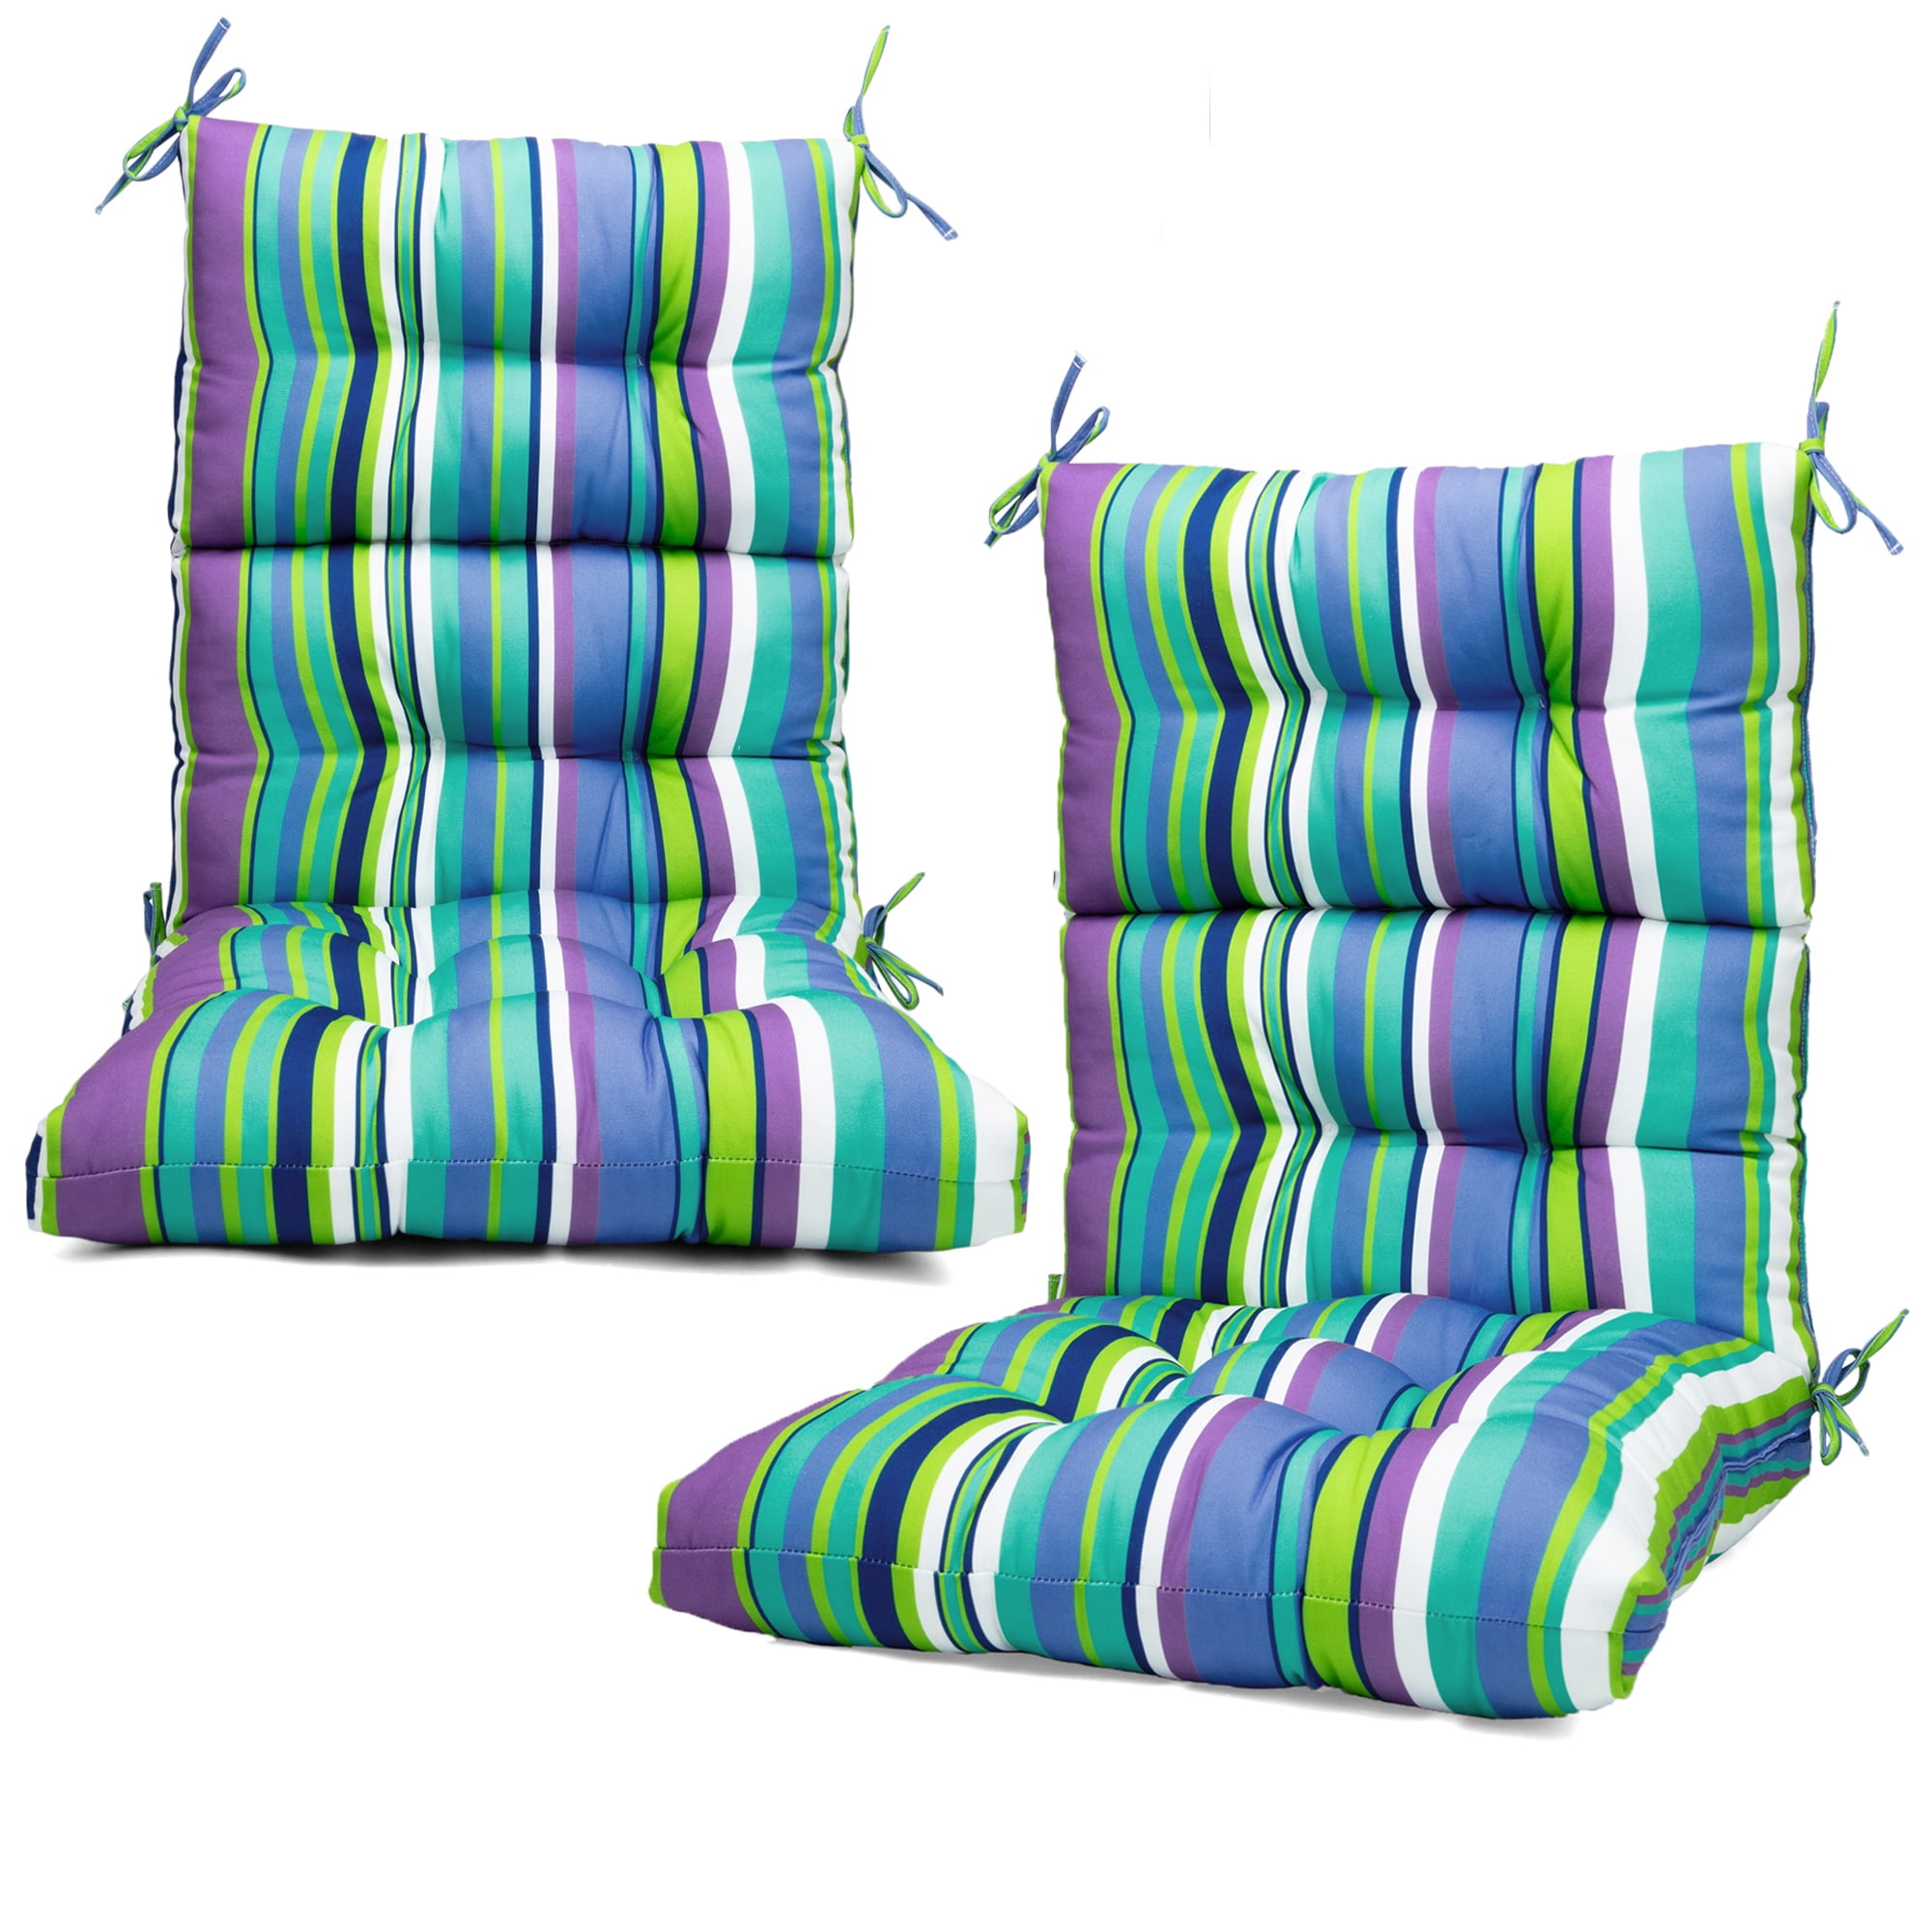 170 * 53 * 7 cm,B Lounge Chair Pads Sun Lounger Cushion Pad Thick Replacement Sunbed Cushion with Top Cover and 6 Ties Suitable for Courtyard Indoor Garden Terrace